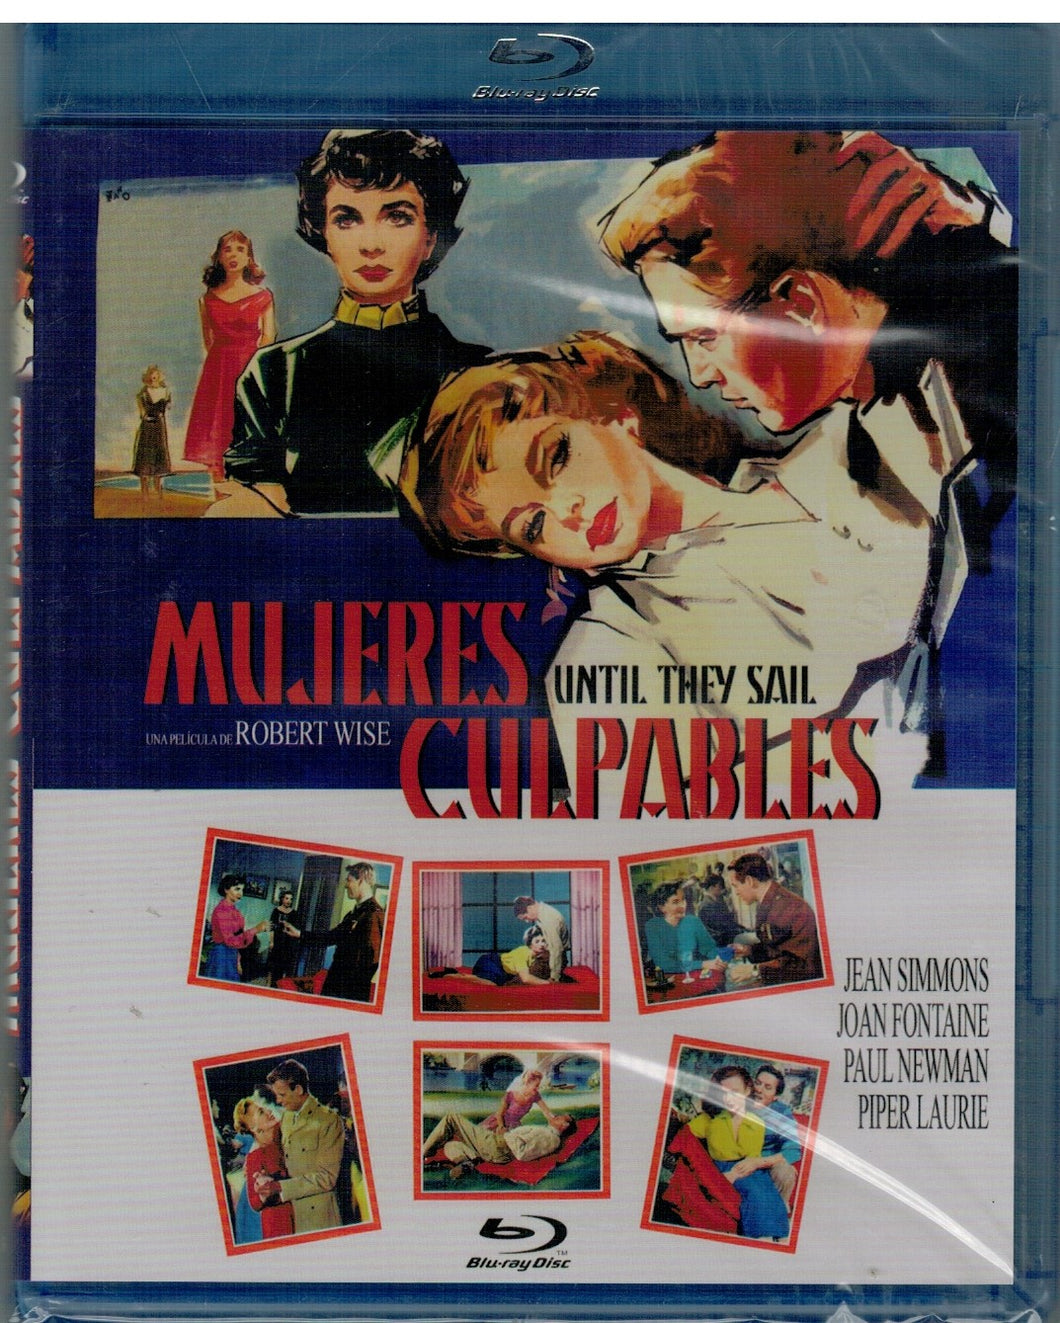 Mujeres culpables (Until They Sail) (Bluray Nuevo)